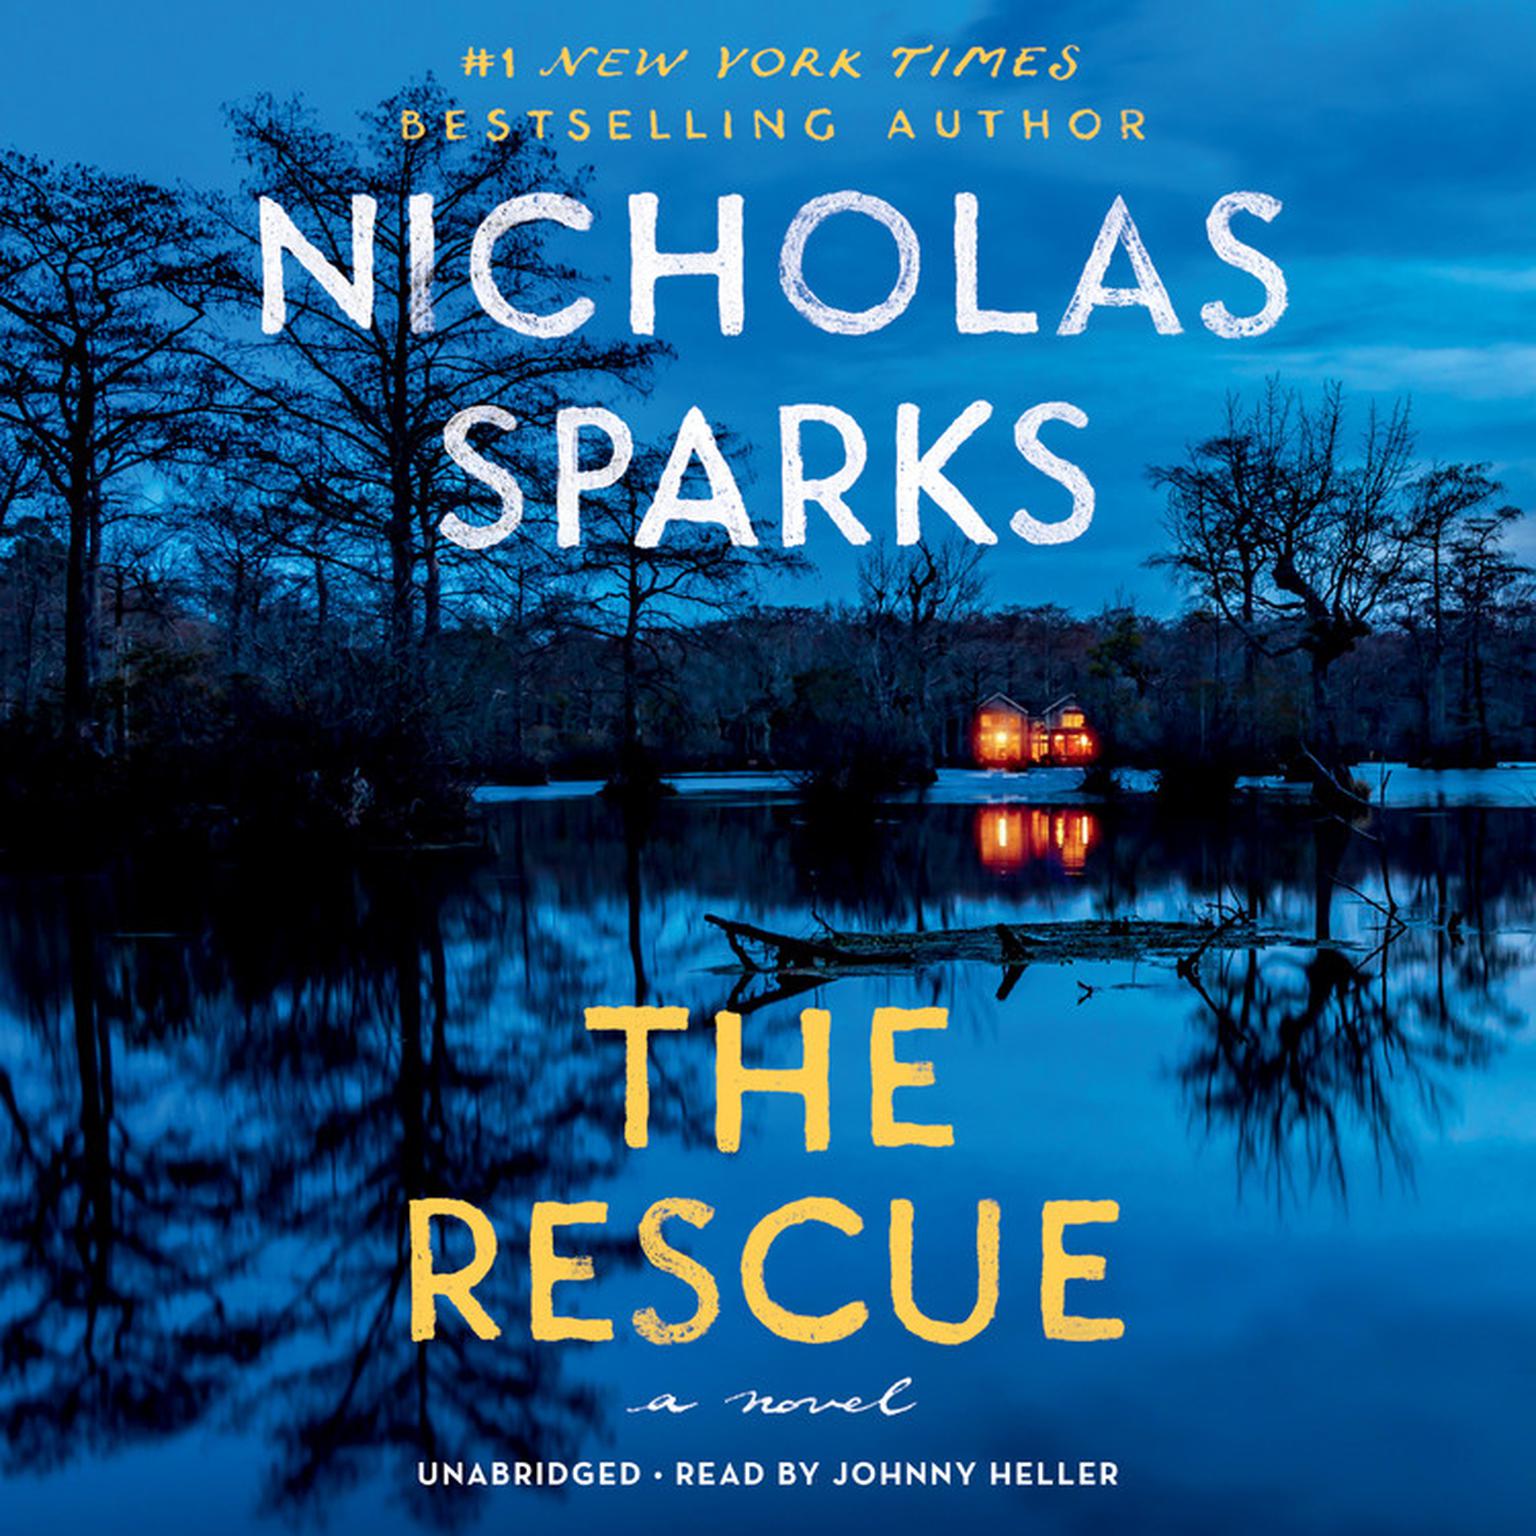 The Rescue Audiobook, by Nicholas Sparks